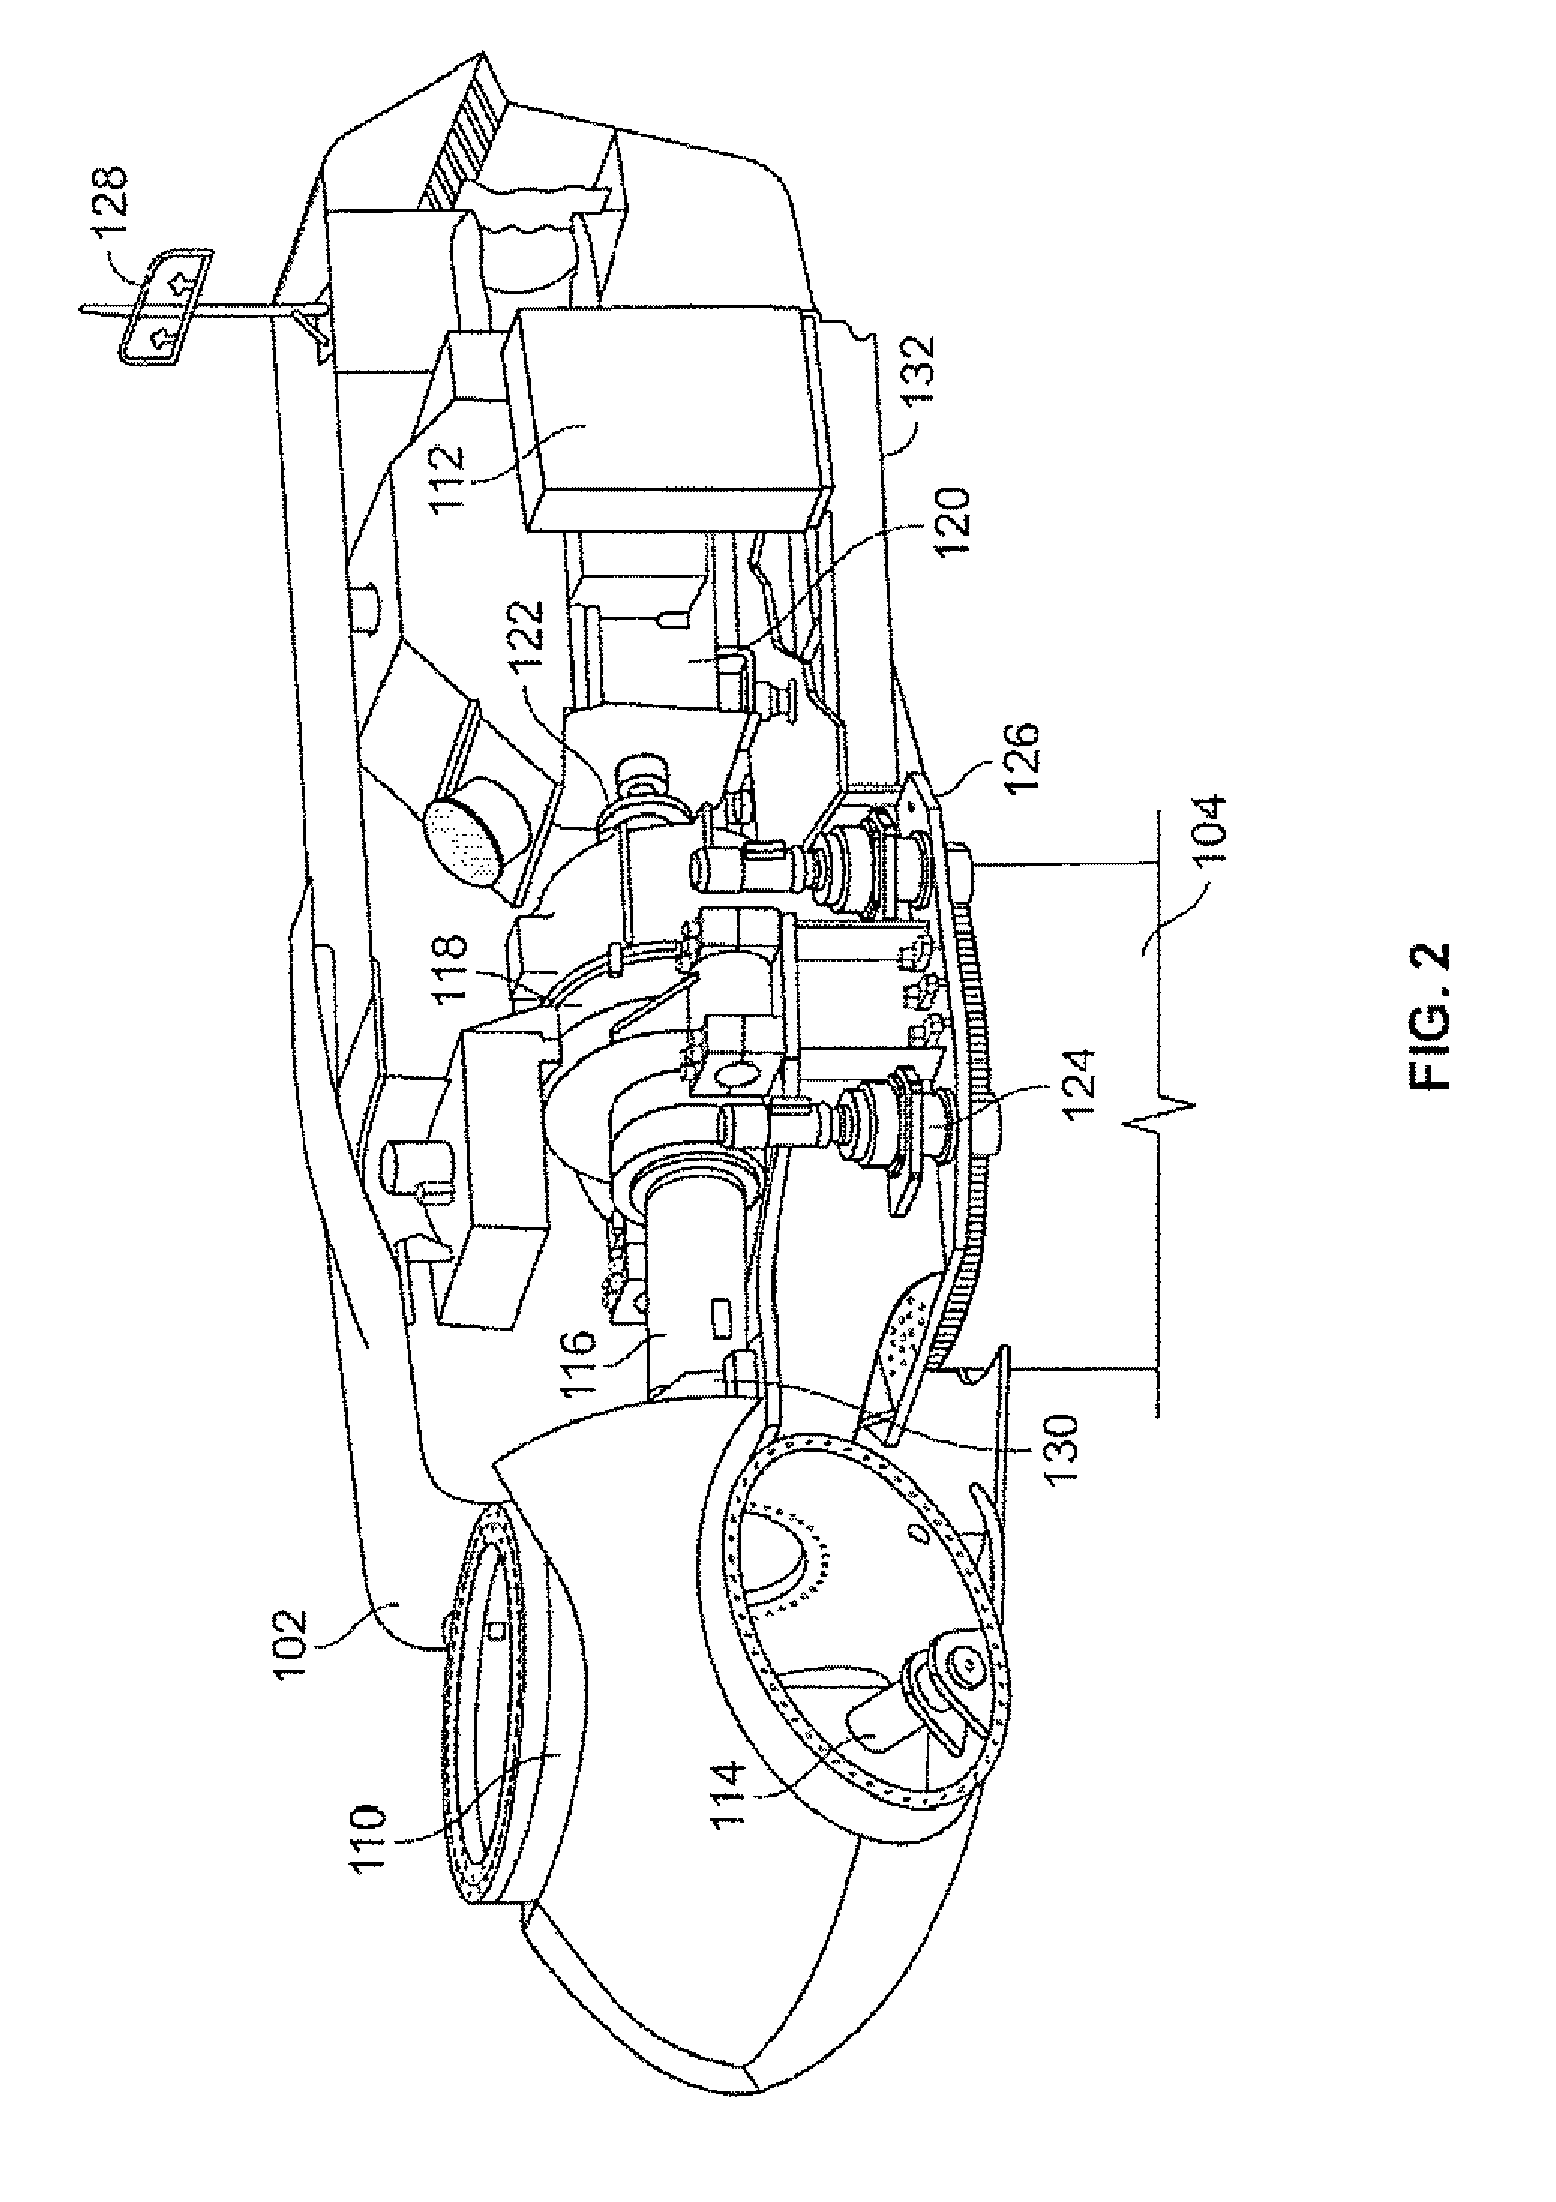 Blade pitch management method and system